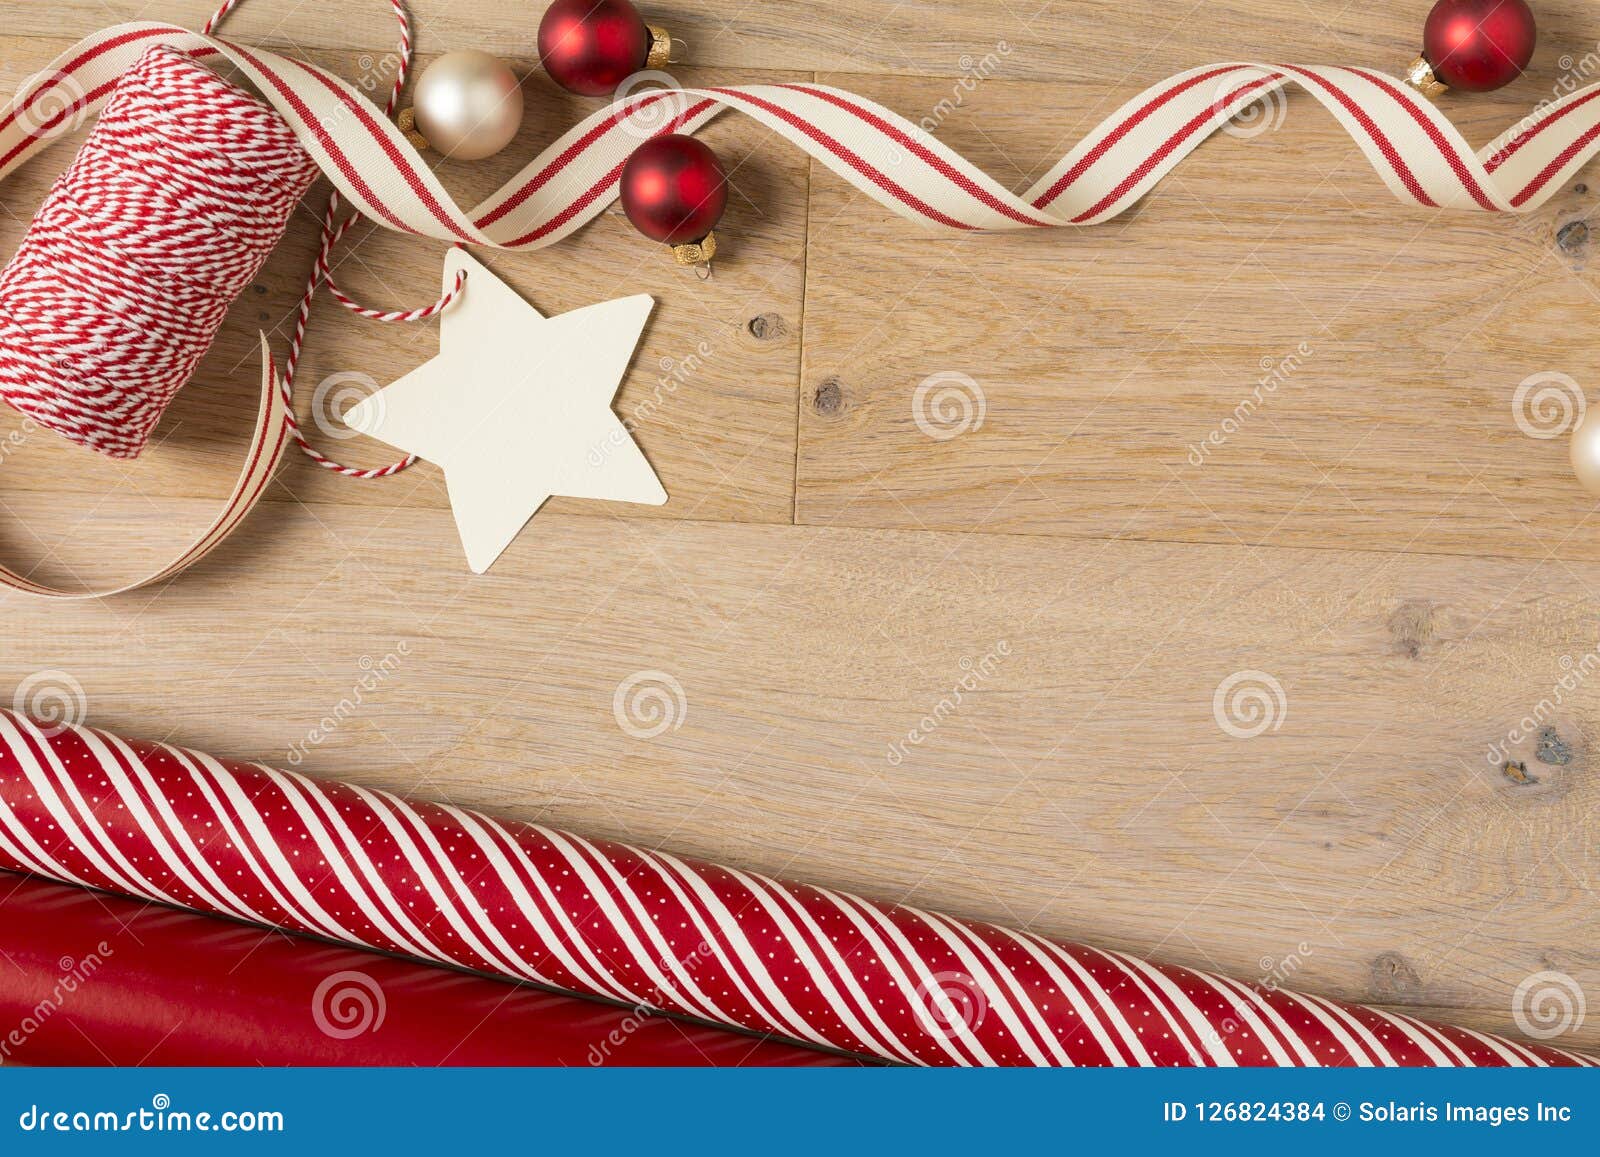 christmas gift wrapping paper and ribbons supplies on wood background